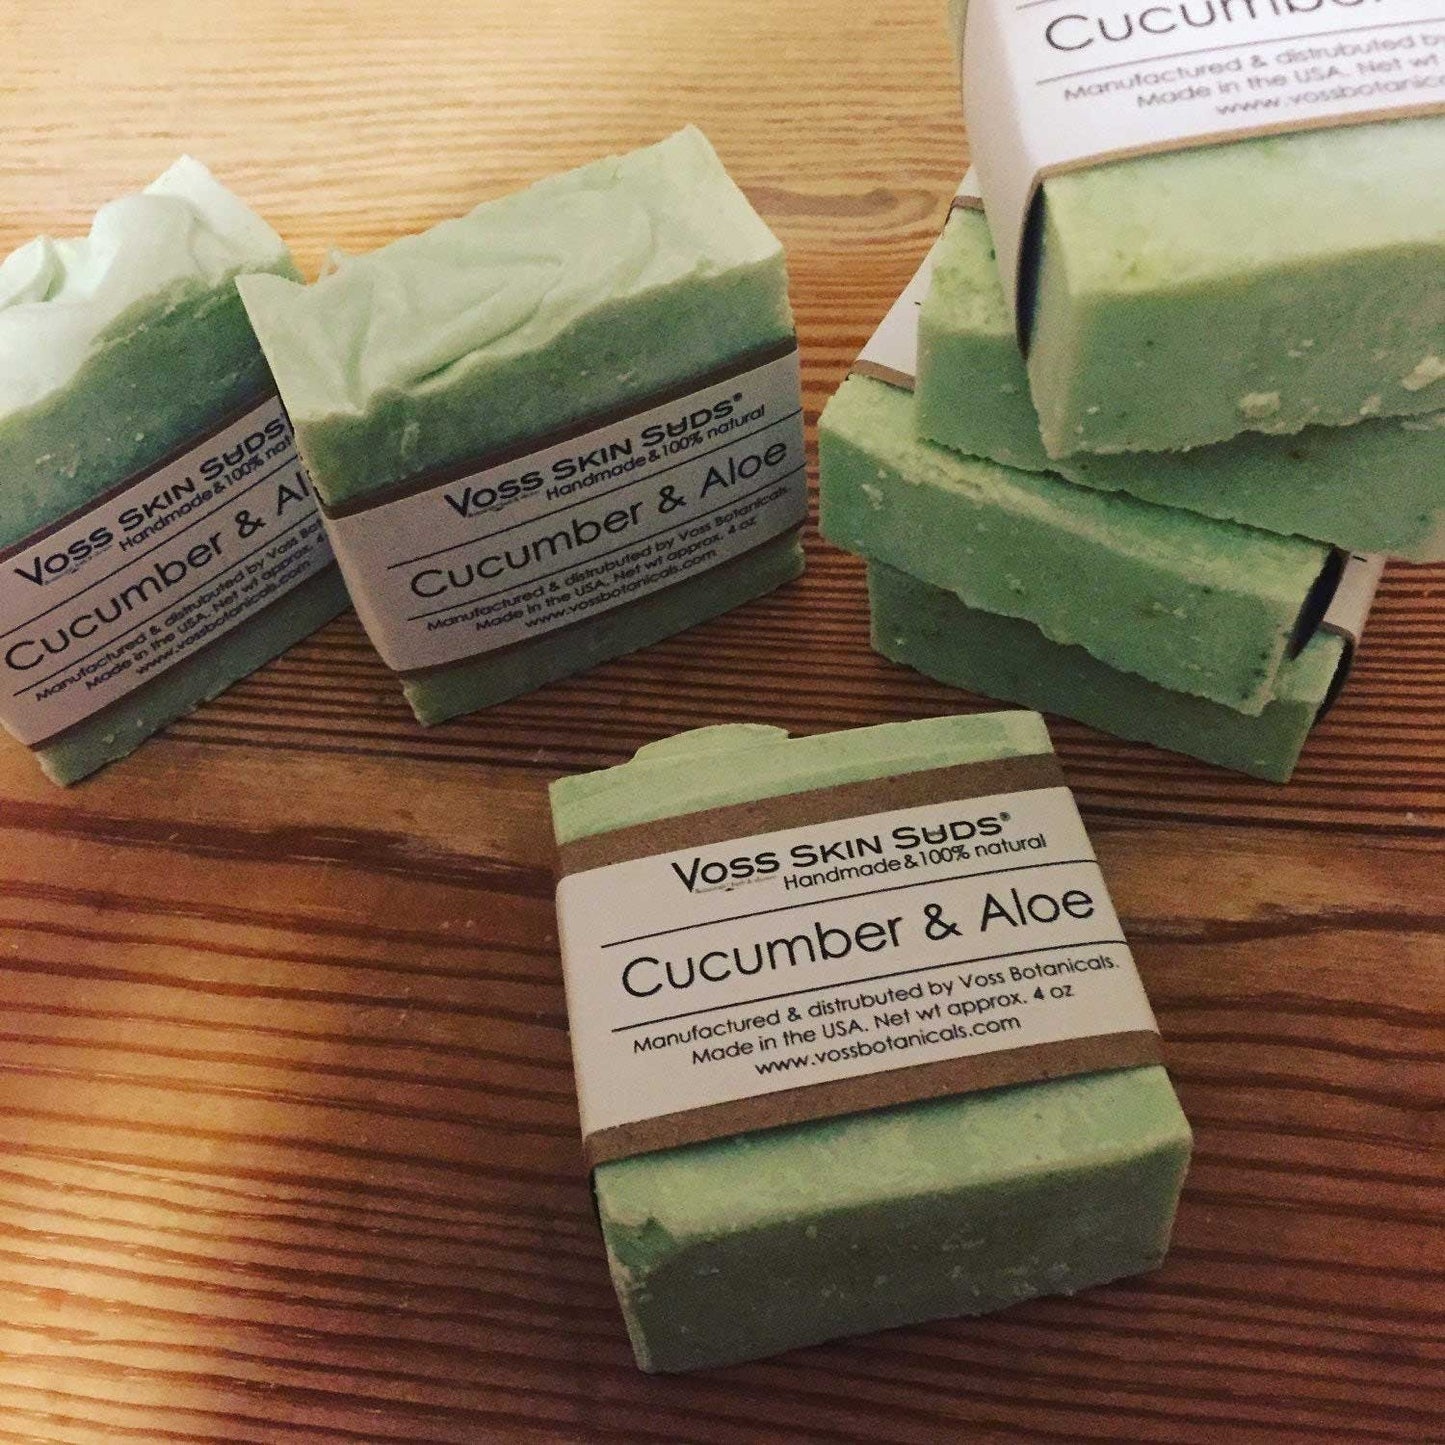 Cucumber and Aloe Face and Body Soap, Stress Relief Gift, Friendship Gift, Self-Care Box for Women, Care Package for Her, Mental Health Self Care Package for Her, Best friend gift, friendship box, friendship gift, gift box, gift for women, mental health, personalized gift, self-care, self-care kit, self-care package, self-care set, spa gift box, thinking of you